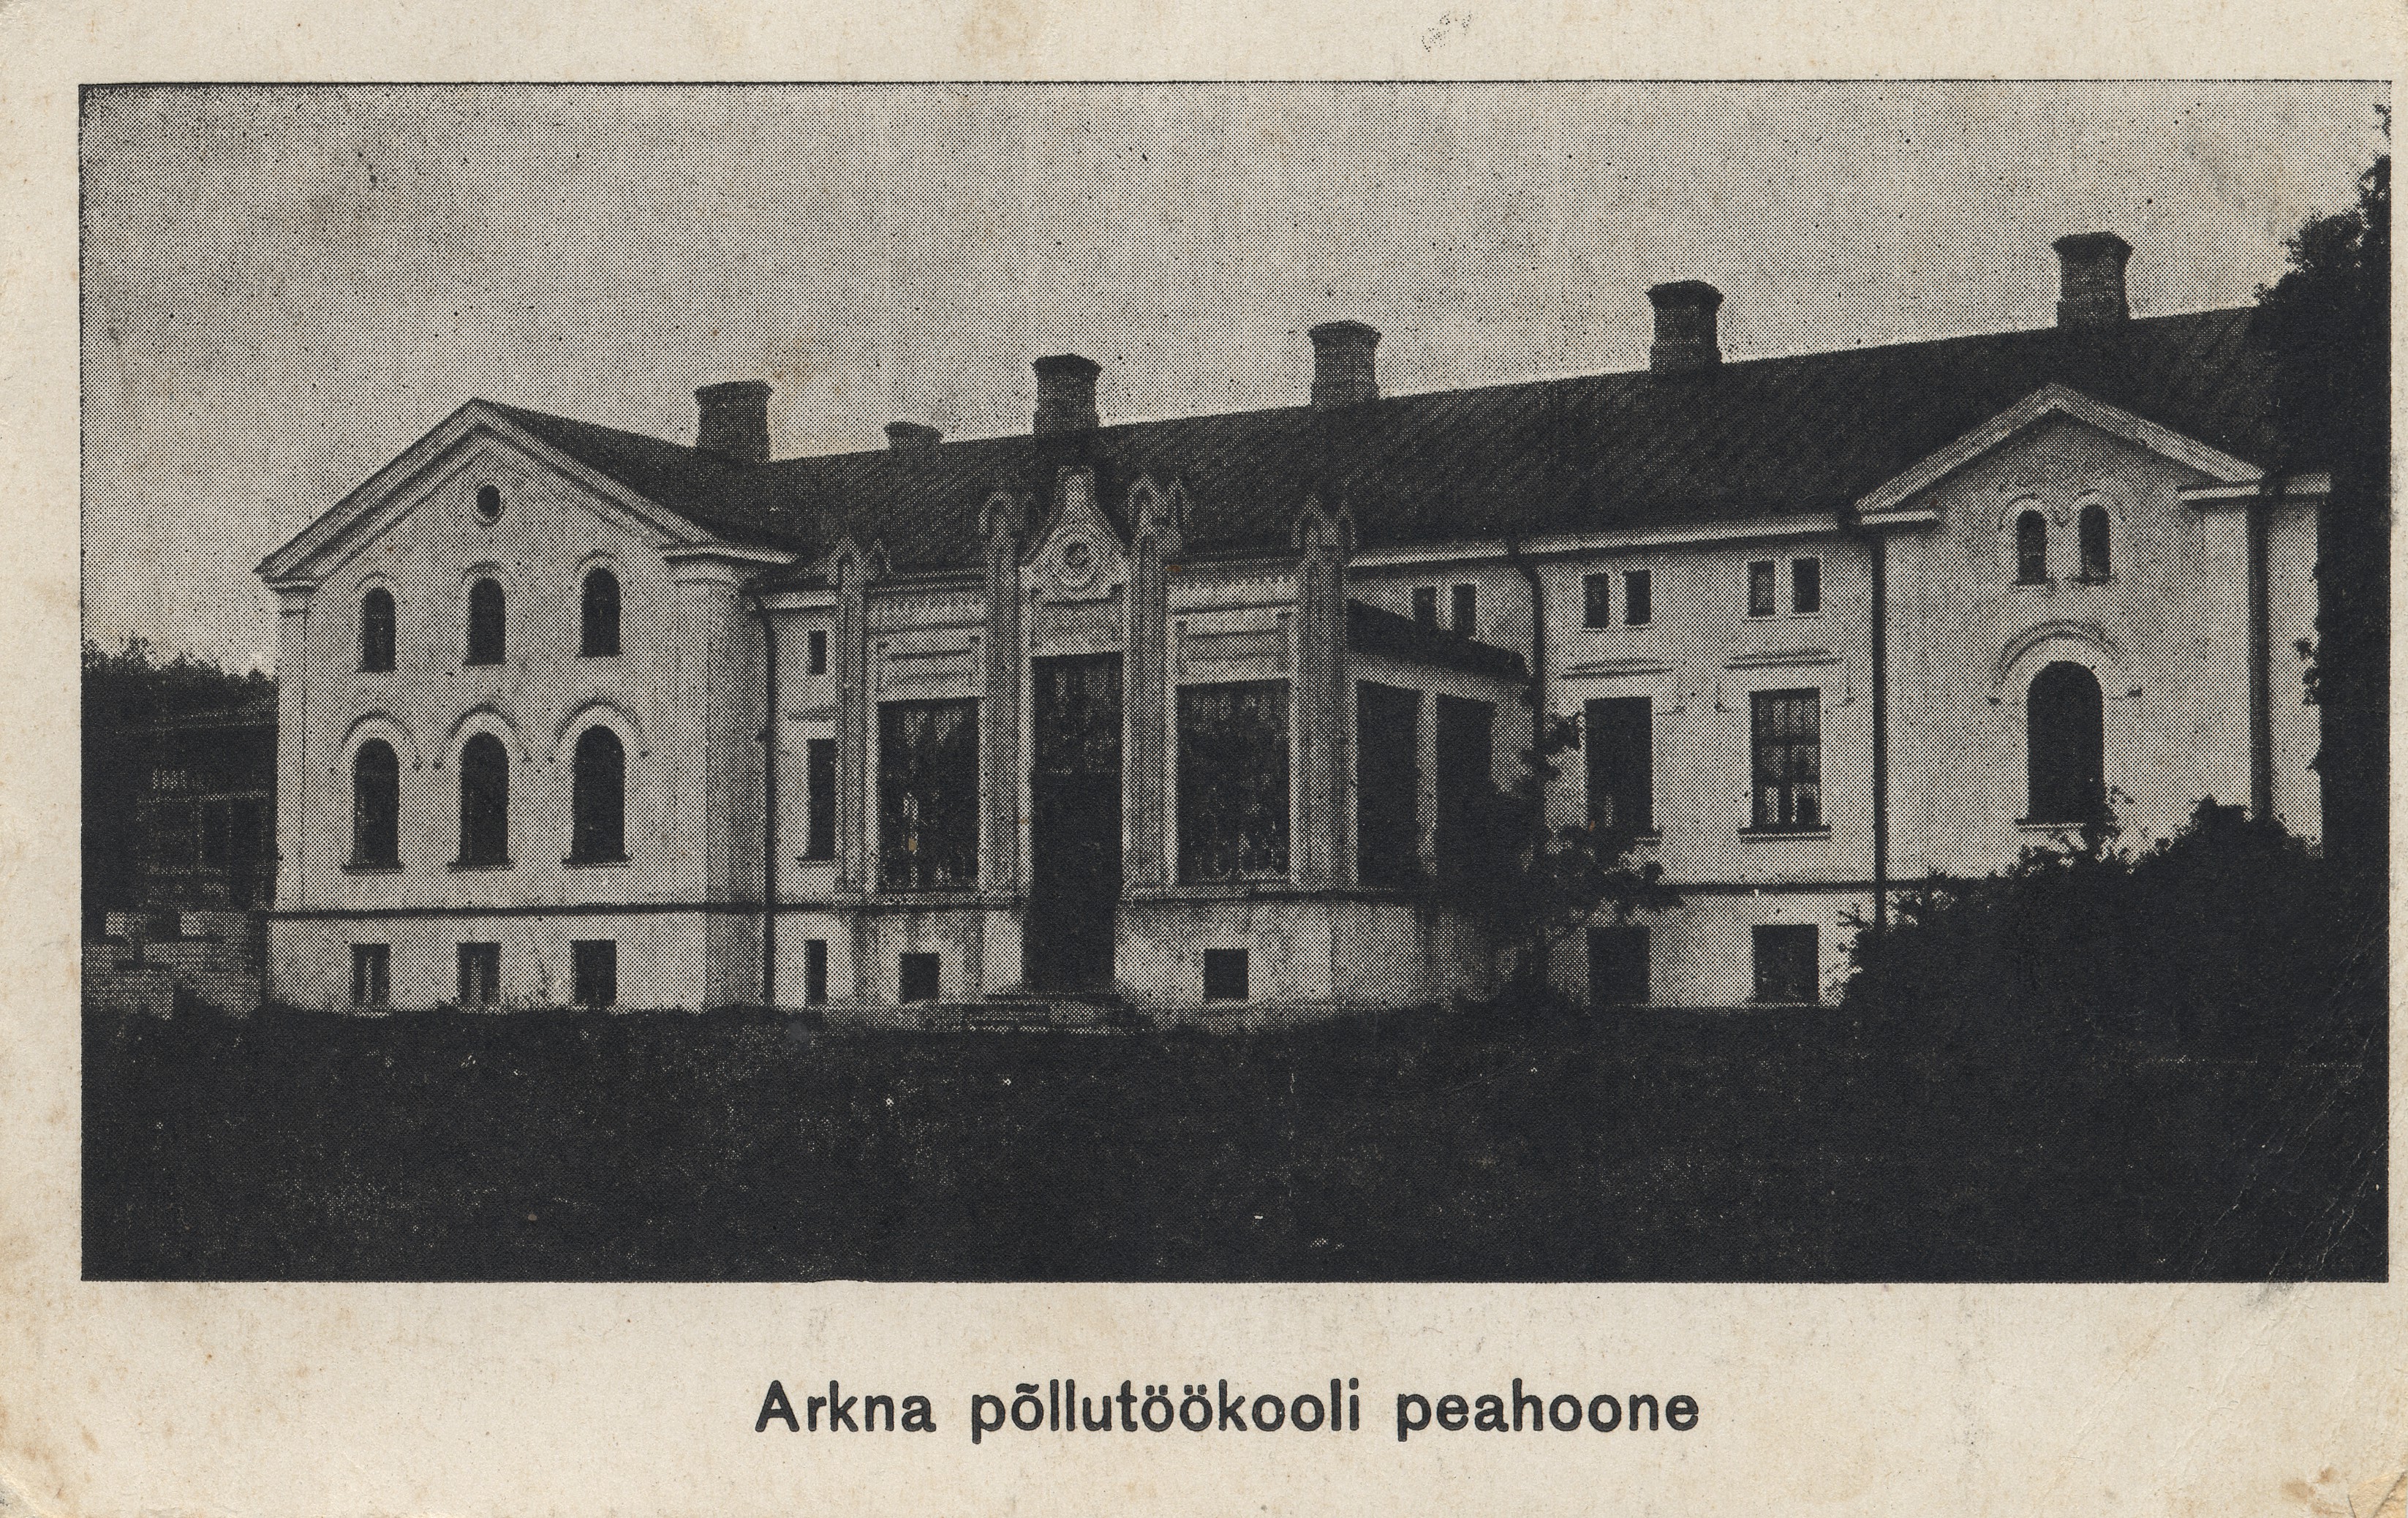 Main building of Arkna Agricultural School